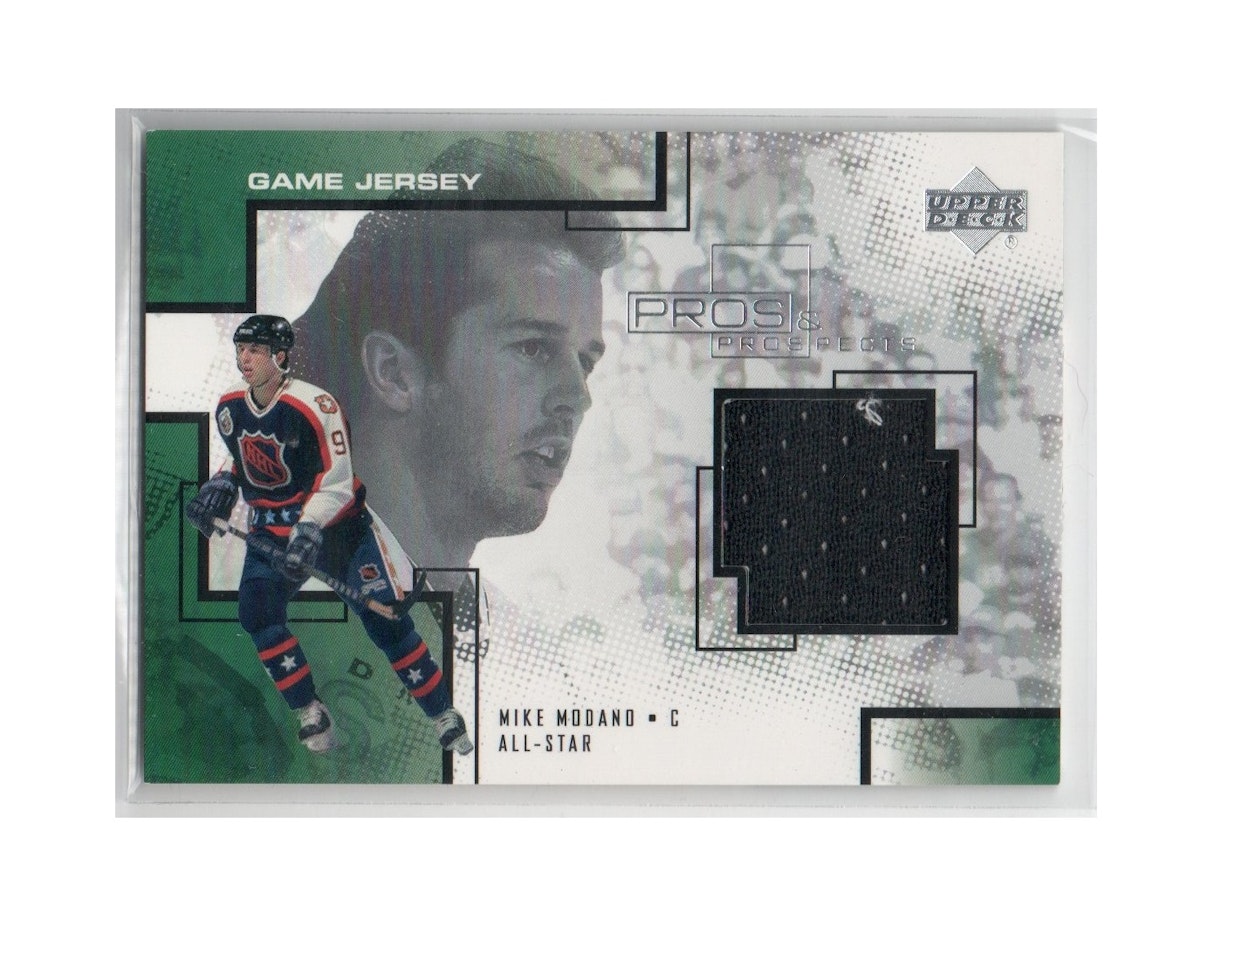 2000-01 Upper Deck Pros and Prospects Game Jerseys #MM Mike Modano (40-X146-NHLSTARS)